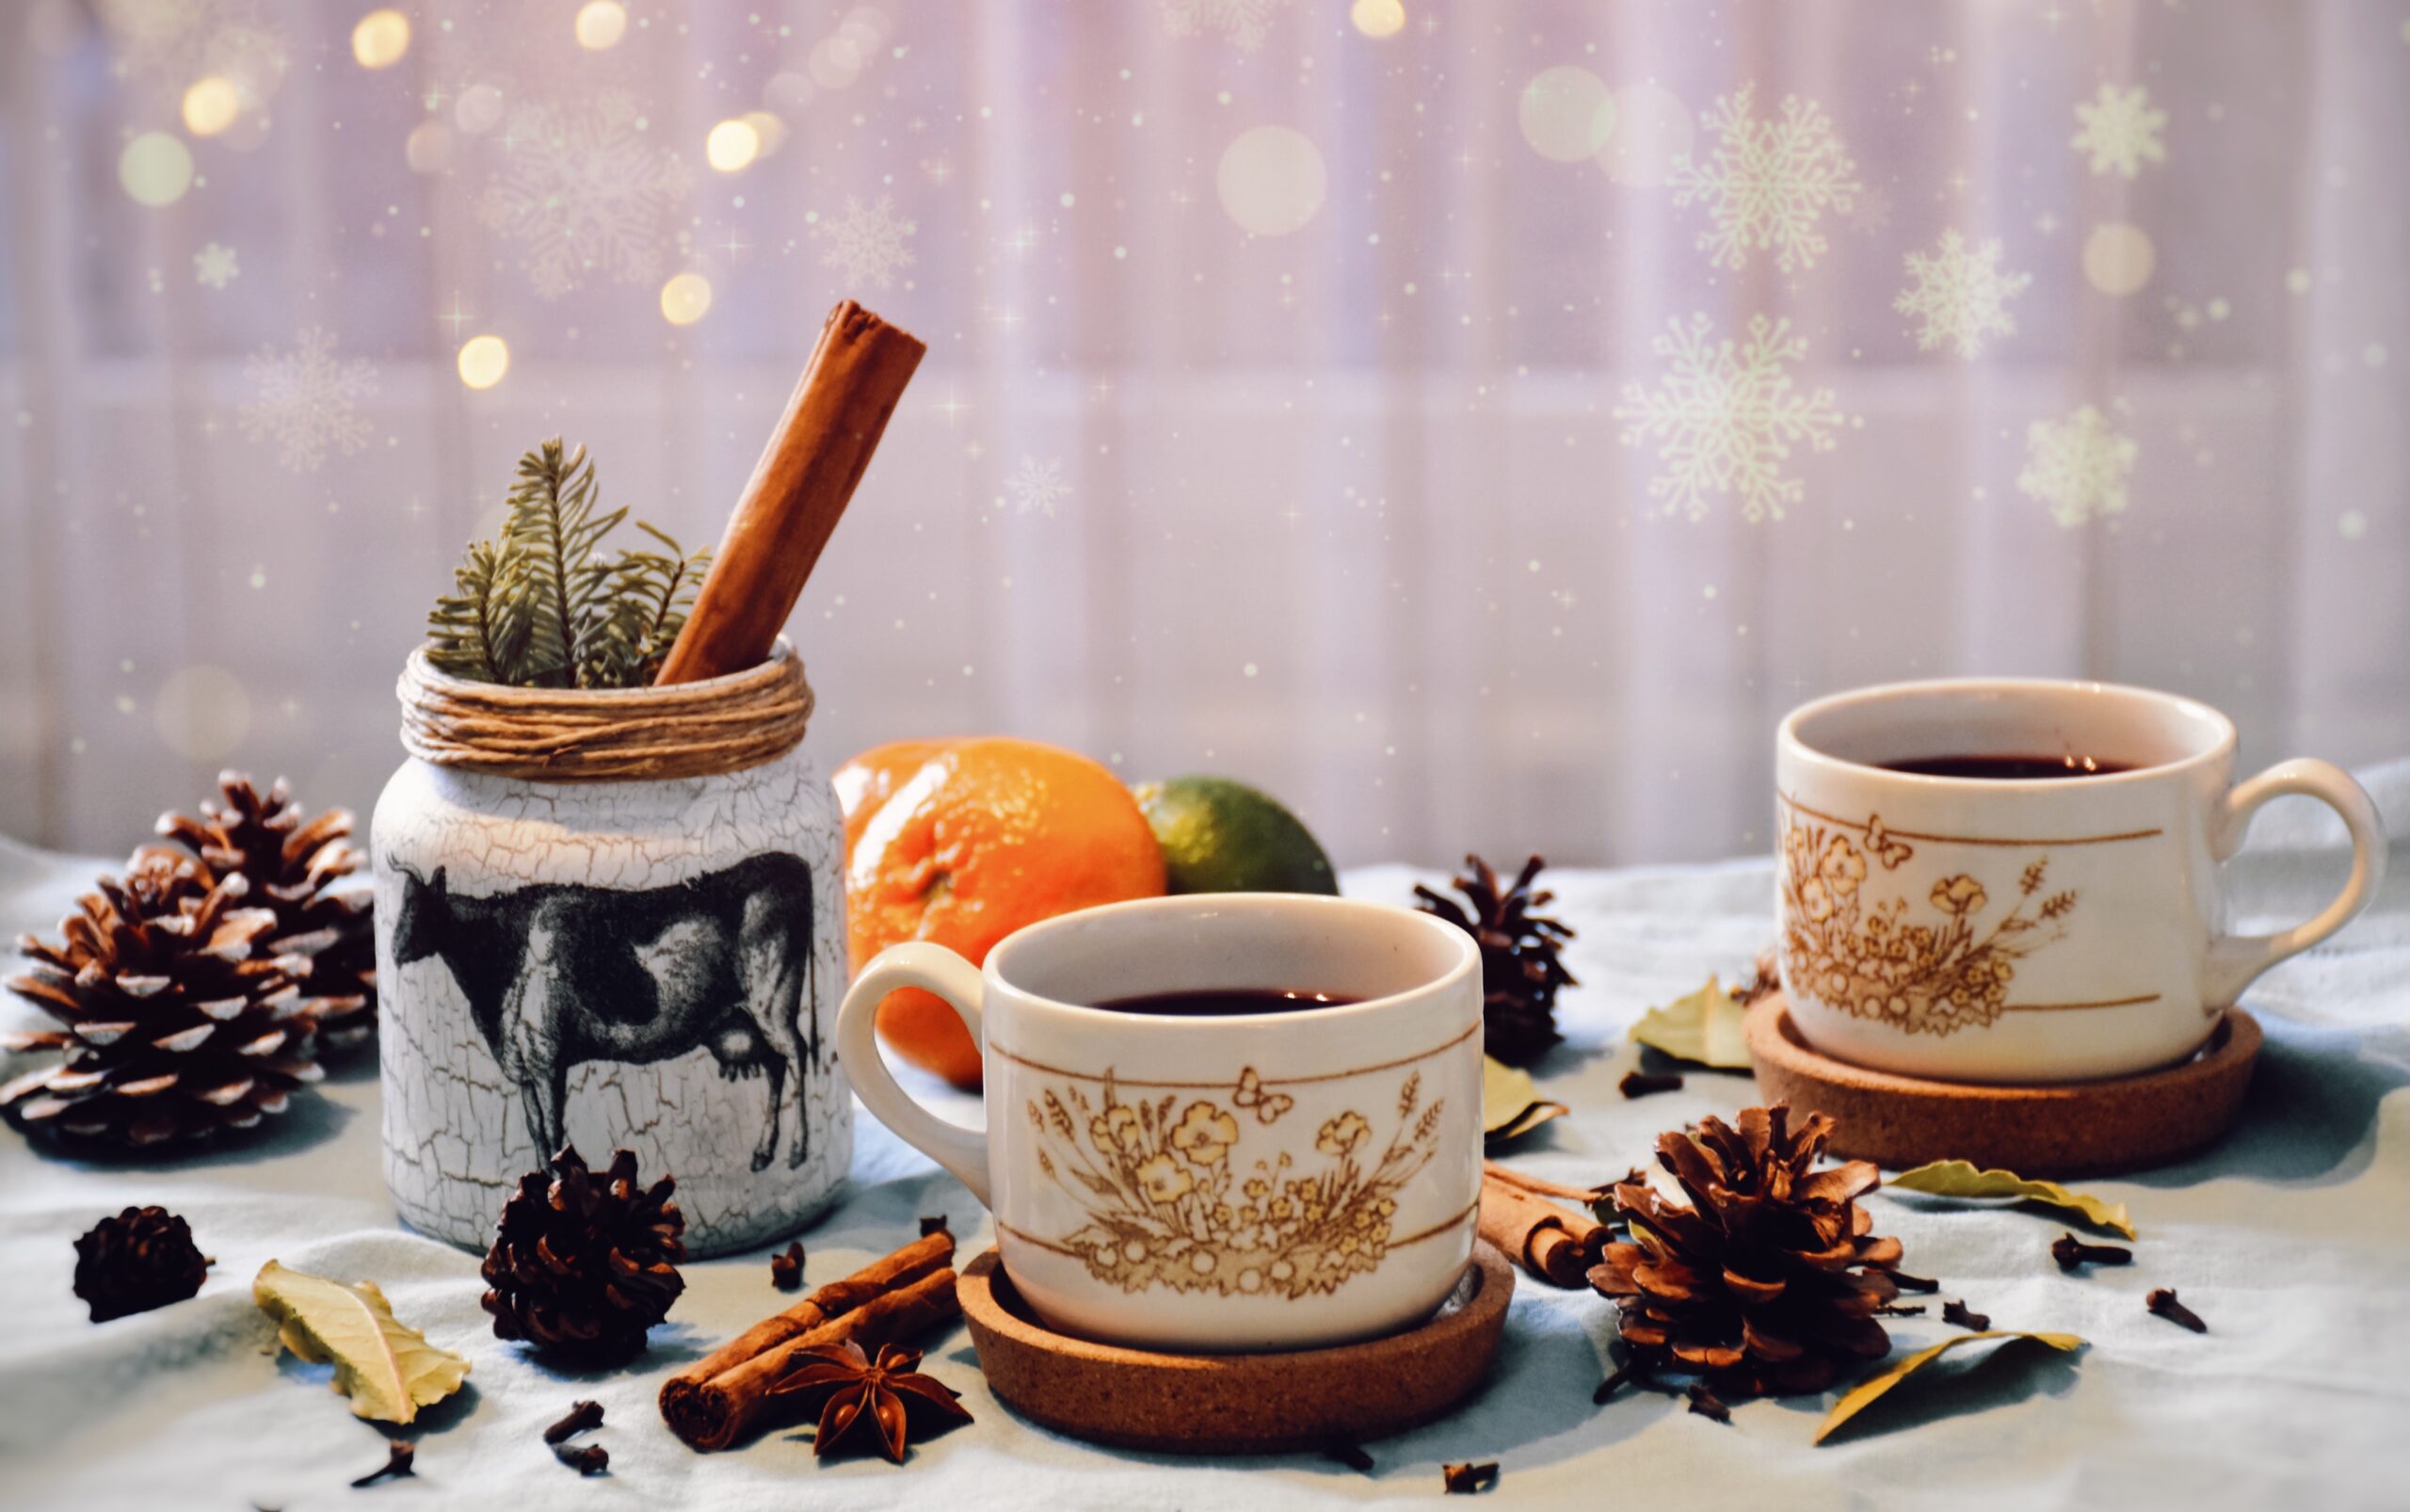 Easy Homemade Mulled Wine Recipe – Perfect for Festive Celebrations